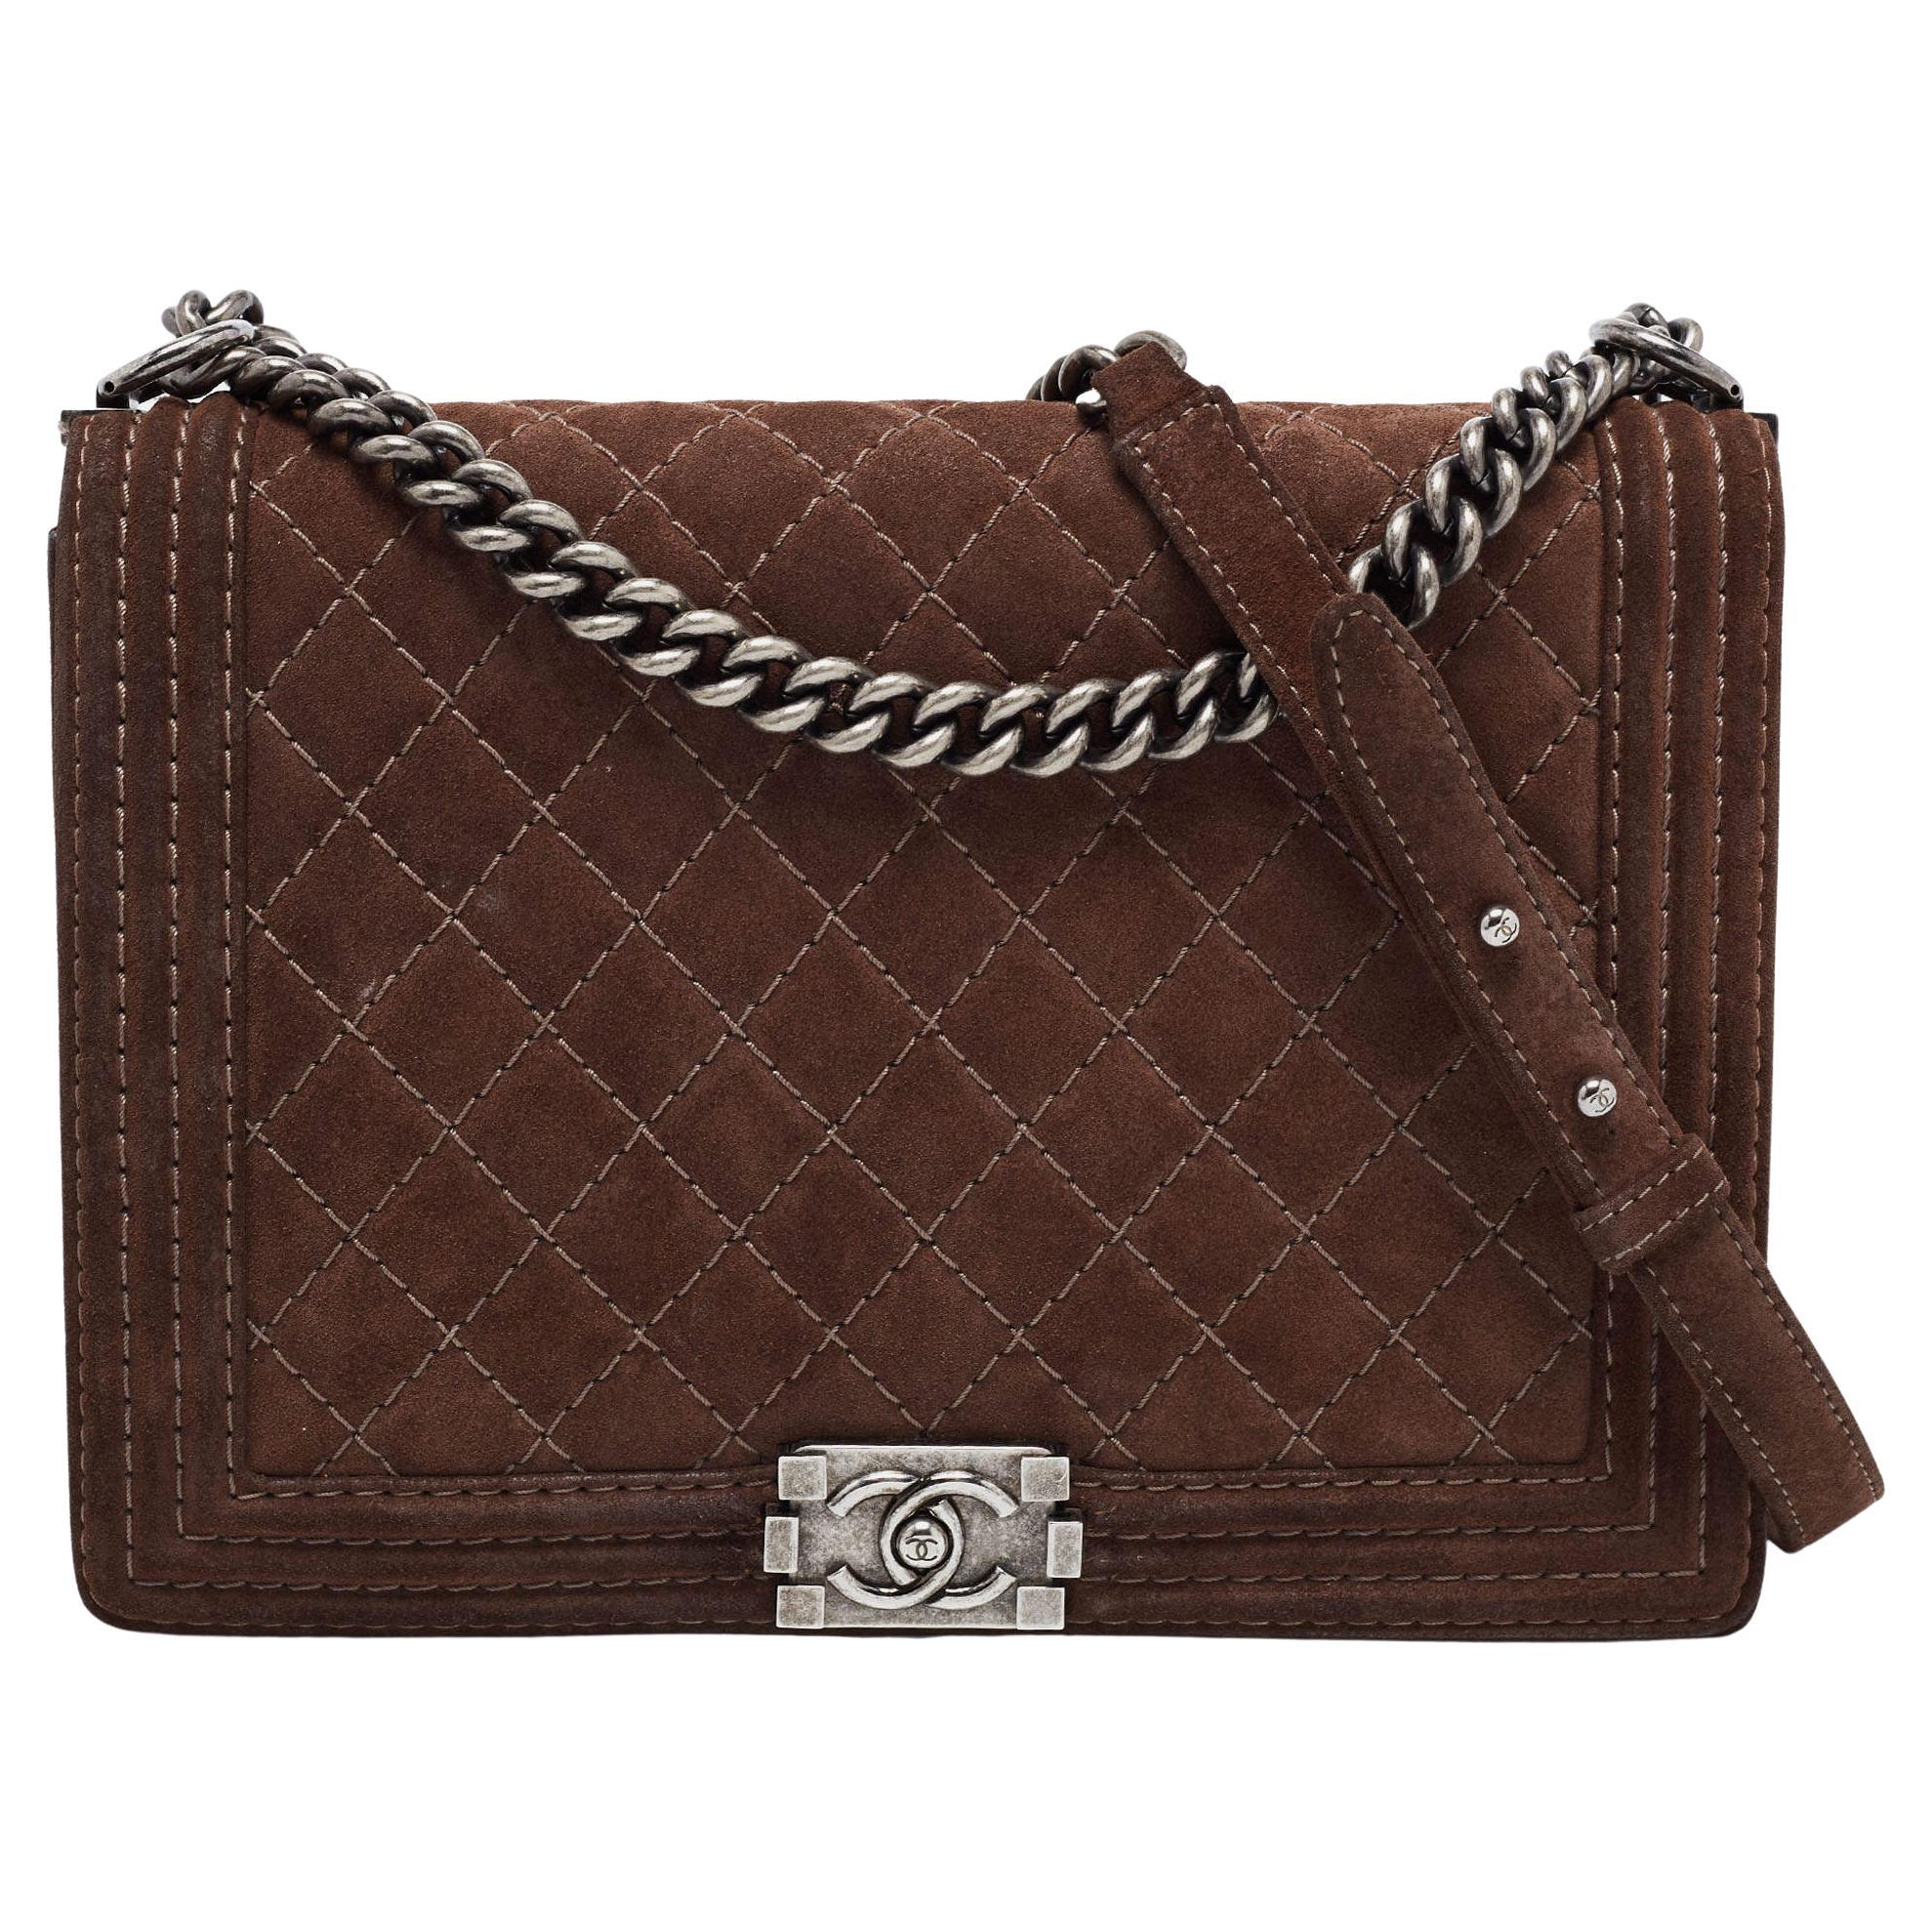 Chanel Brown Quilted Suede Large Boy Bag